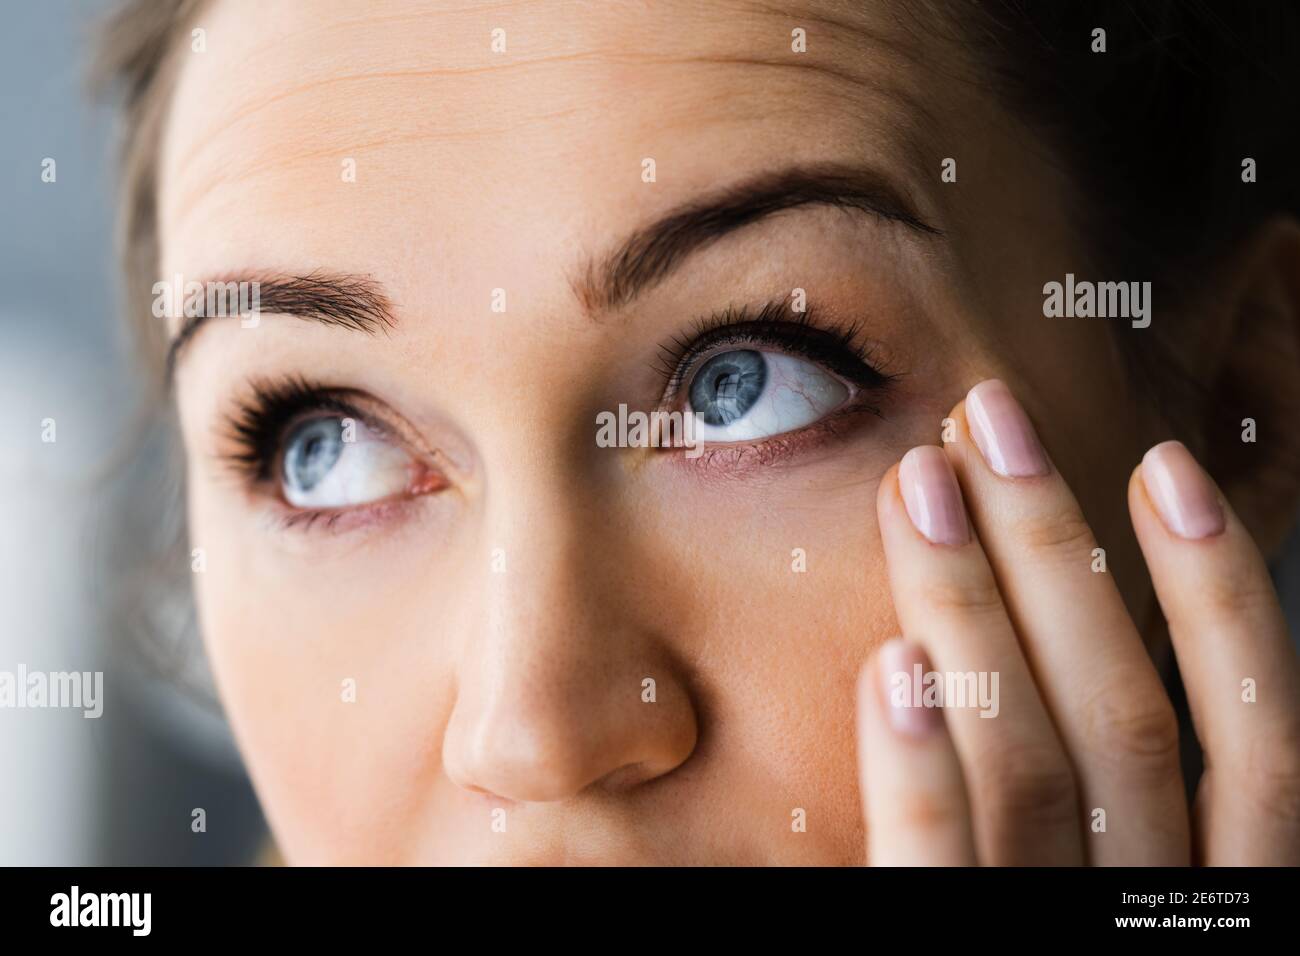 Tired Exhausted Eye Pain And Ache Problem Stock Photo